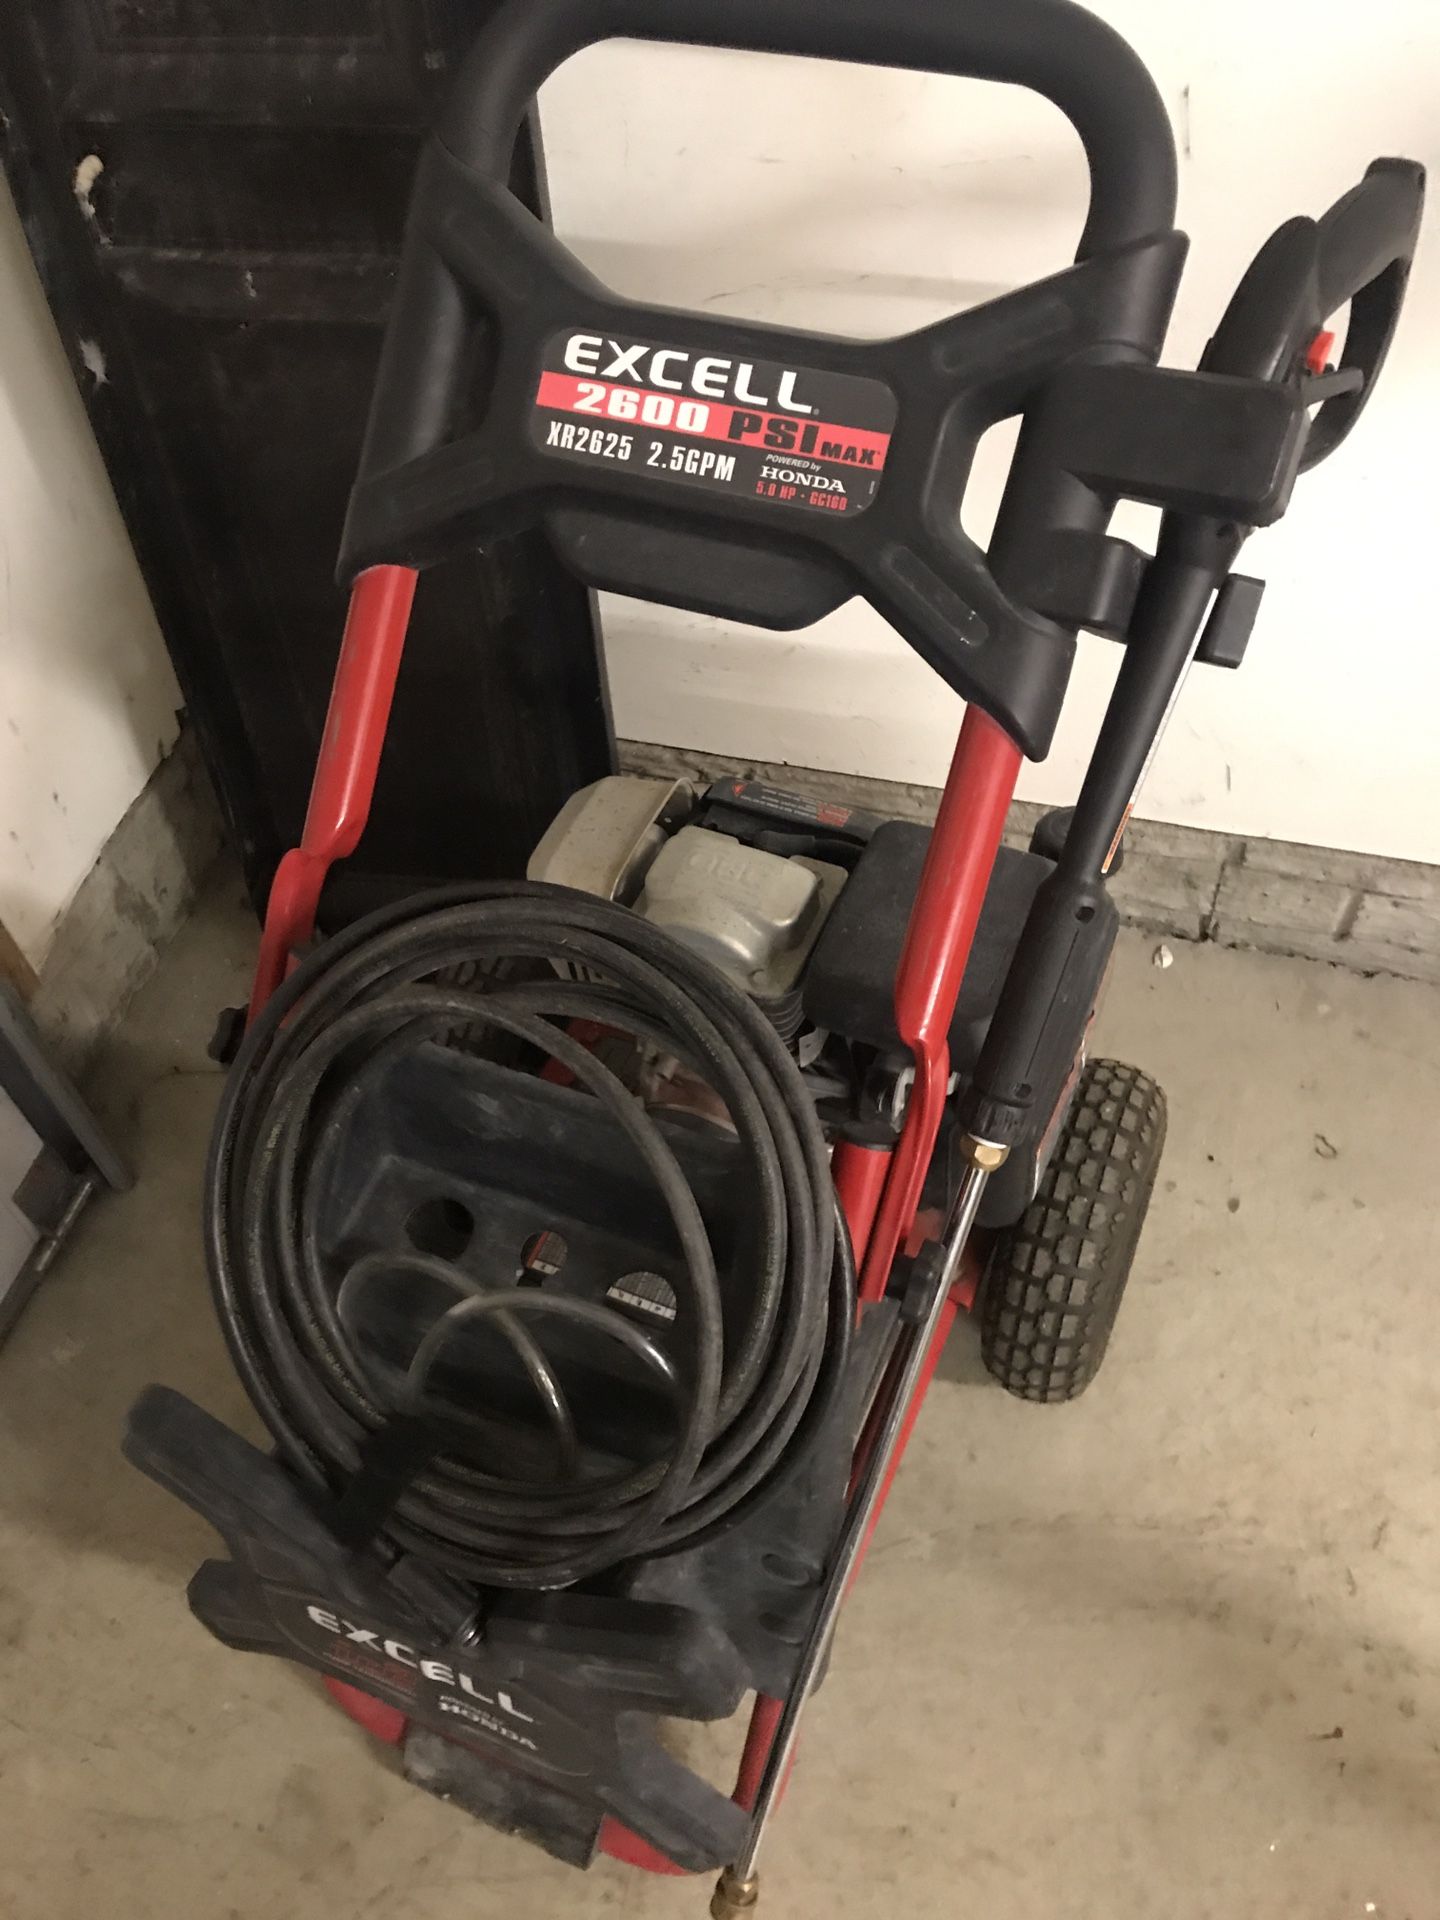 Excell XR2625 Pressure Washer 2600PSI commercial need gone ASAP make an offer